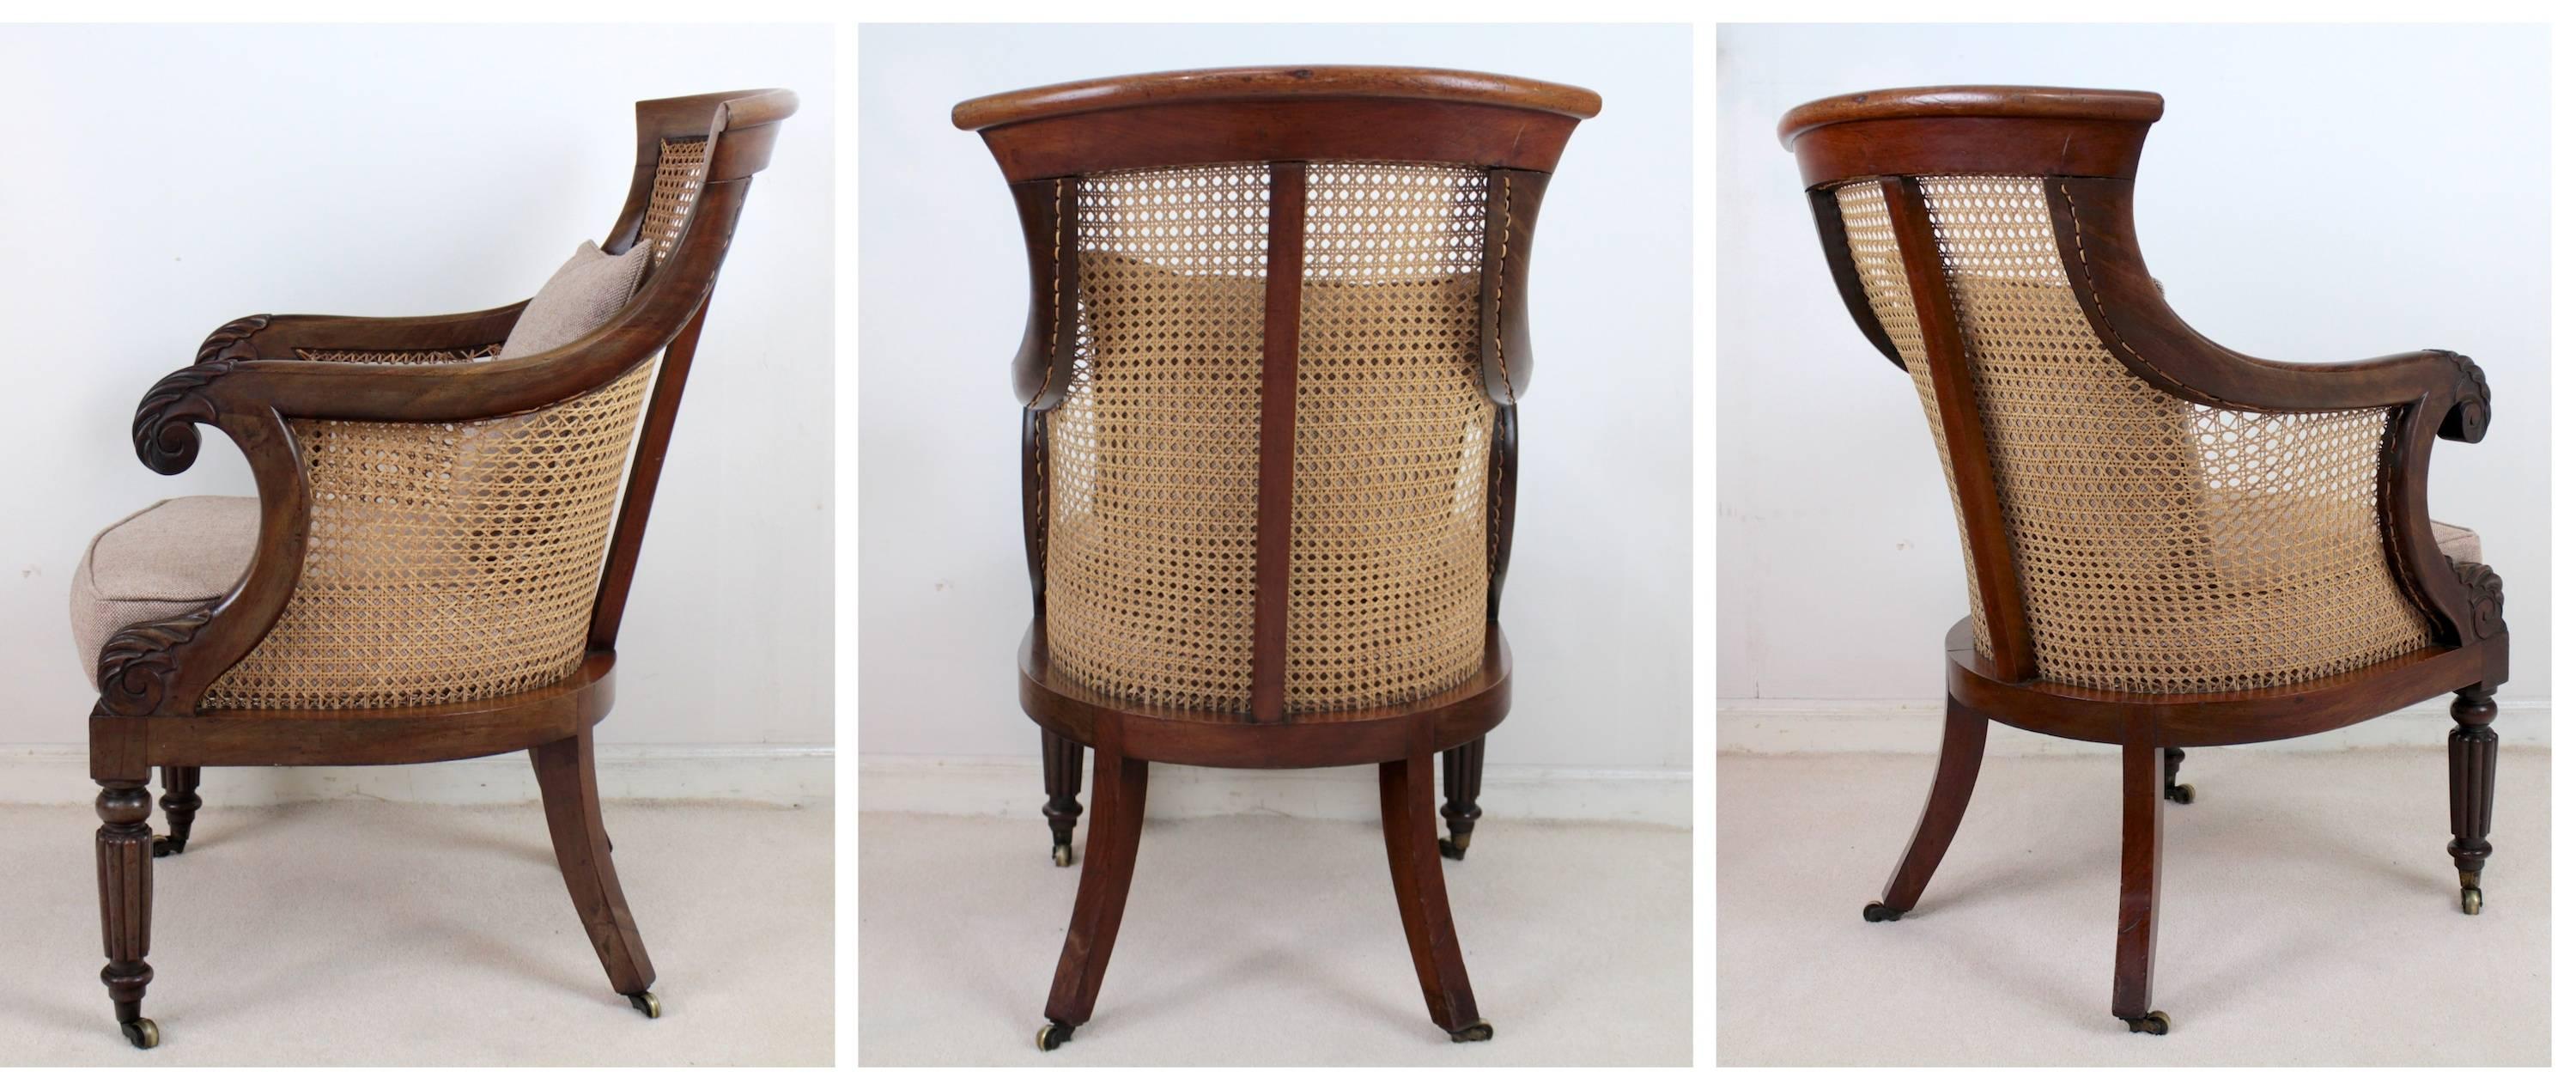 Regency Mahogany and Cane Filled English Library or Bergère Chair 1